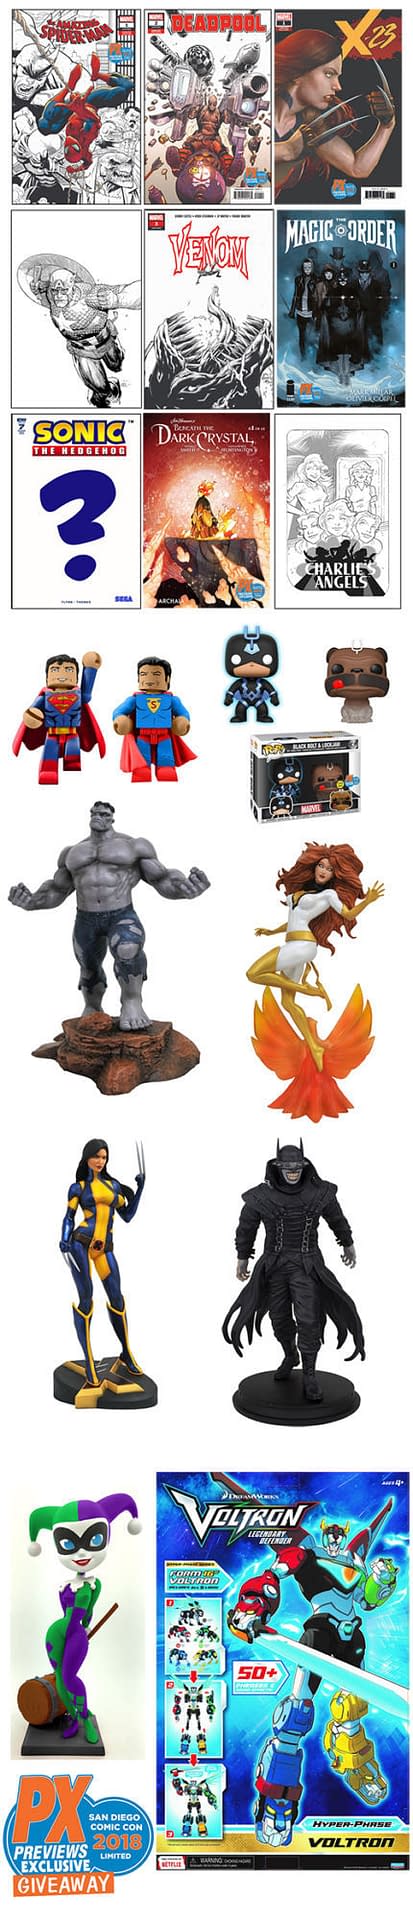 How to Get Diamond's San Diego Comic-Con Exclusives &#8211; Without Going to SDCC